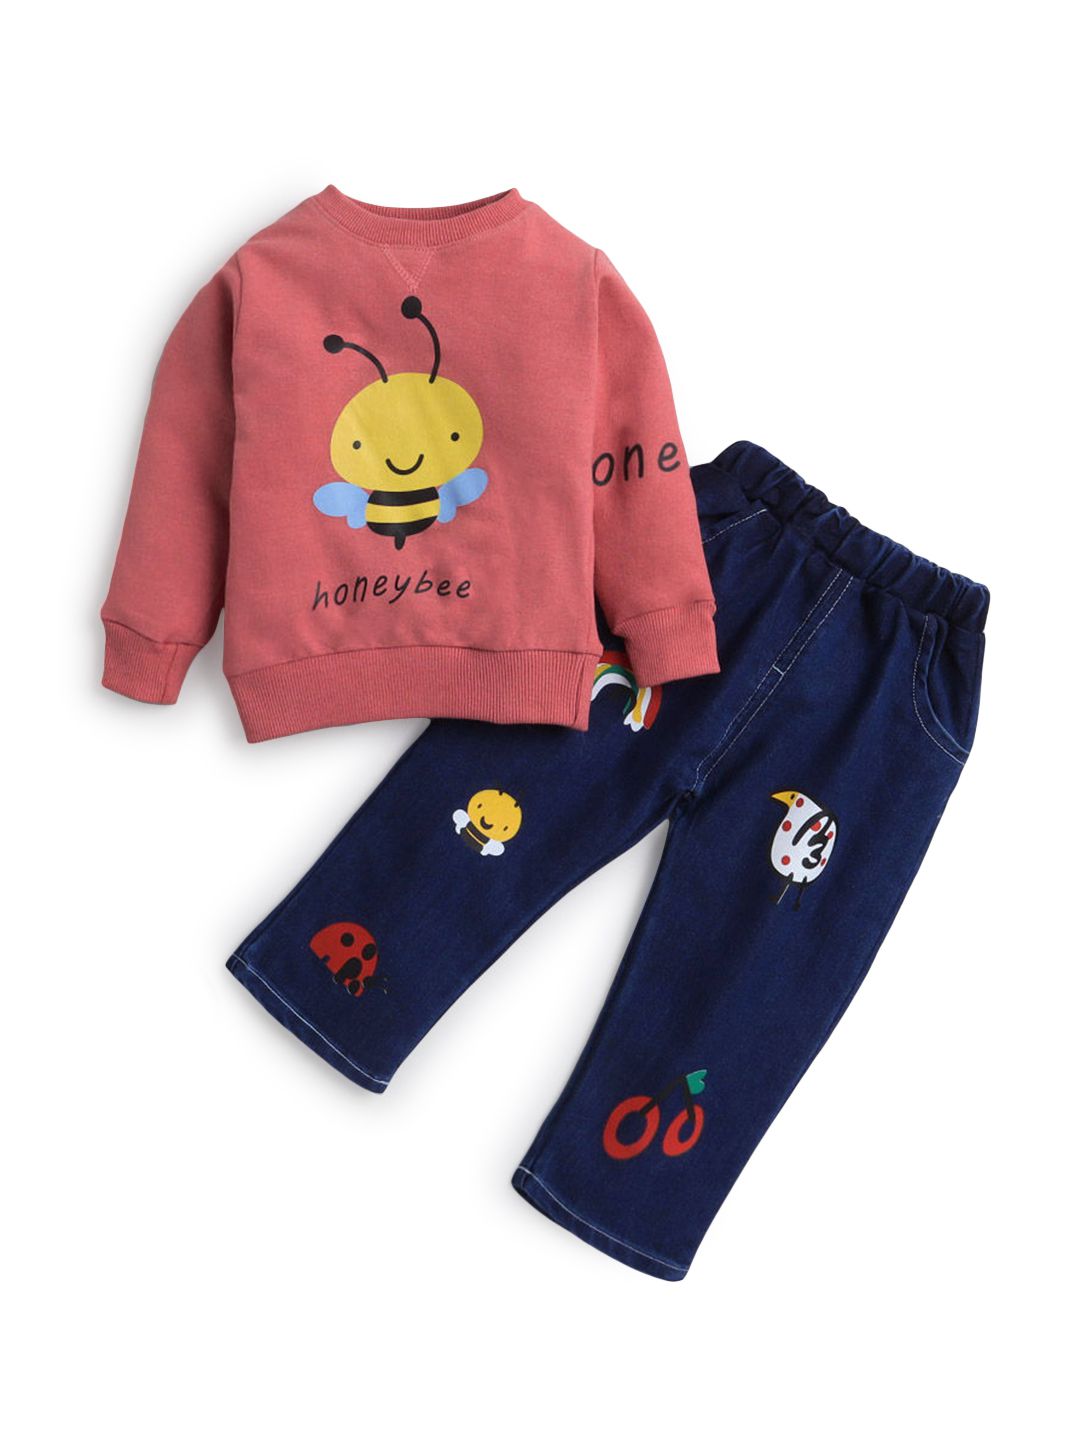 Hopscotch Boys Cotton And Spandex Full Sleeves Animal Printed Sweatshirt And Jeans Set in Red Color For Ages 3-4 Years (YAH-3239991)